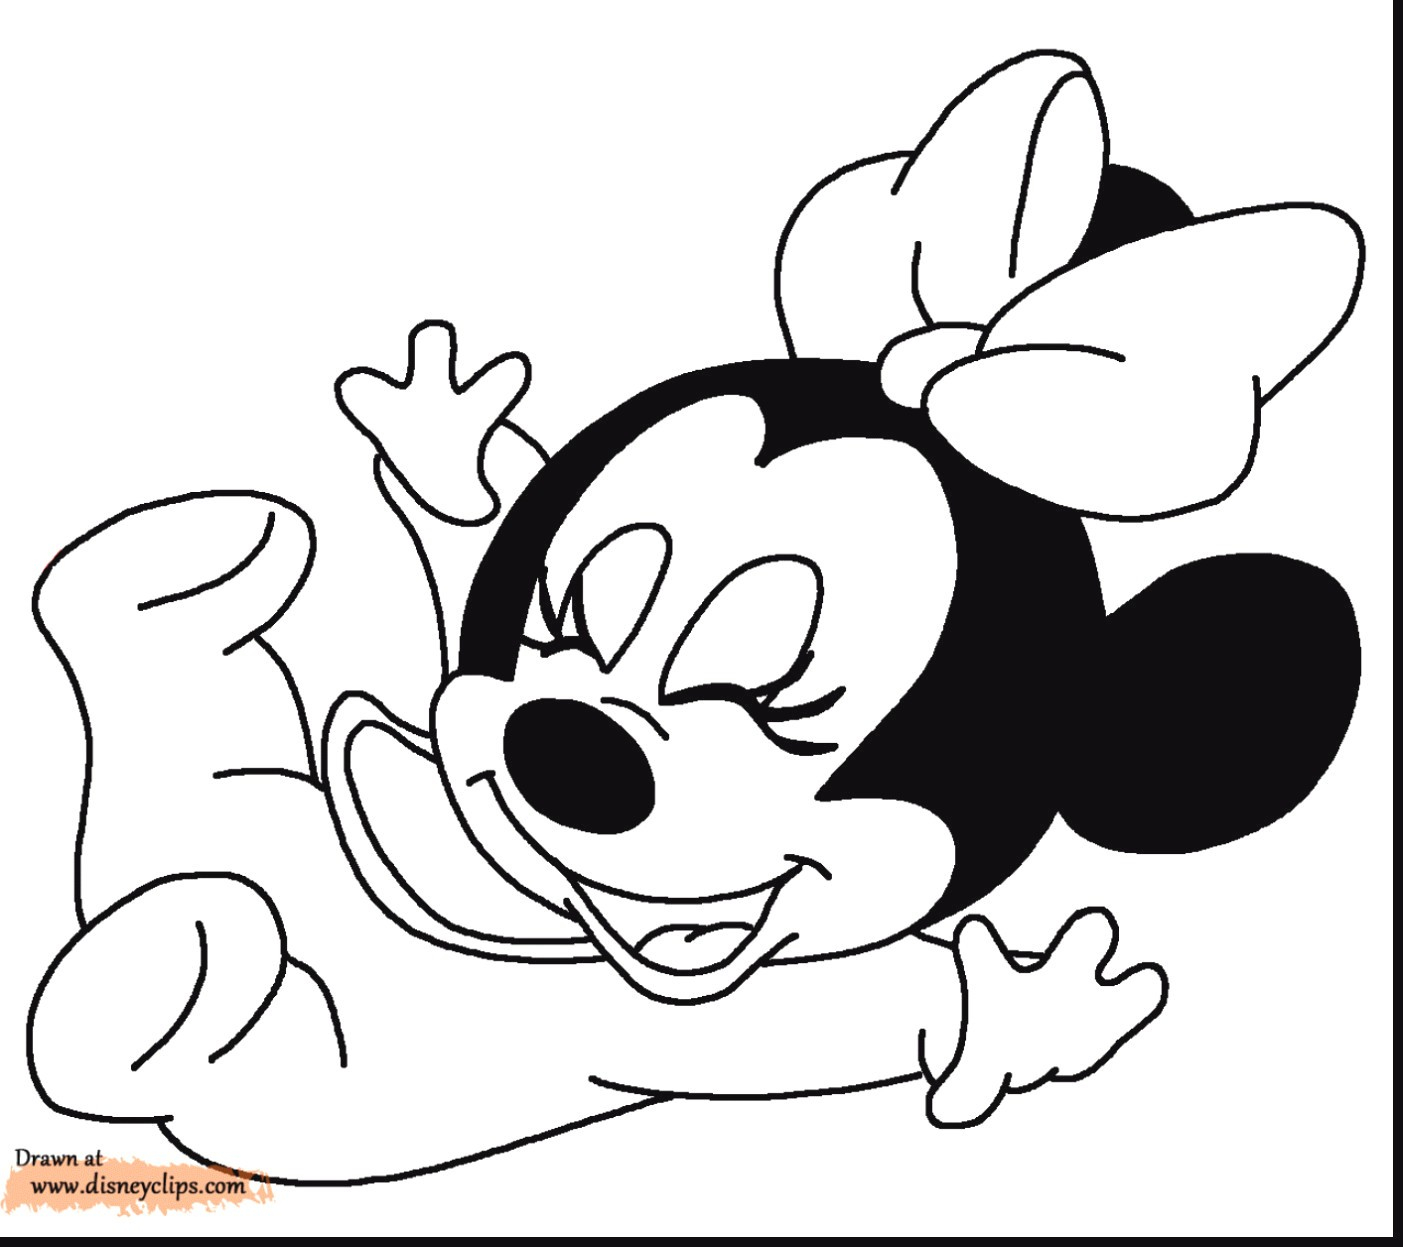 Free Baby Minnie Mouse Coloring Pages Coloring Pages Coloring Ideas Donald Duck Sheets Ba Minnie Mouse